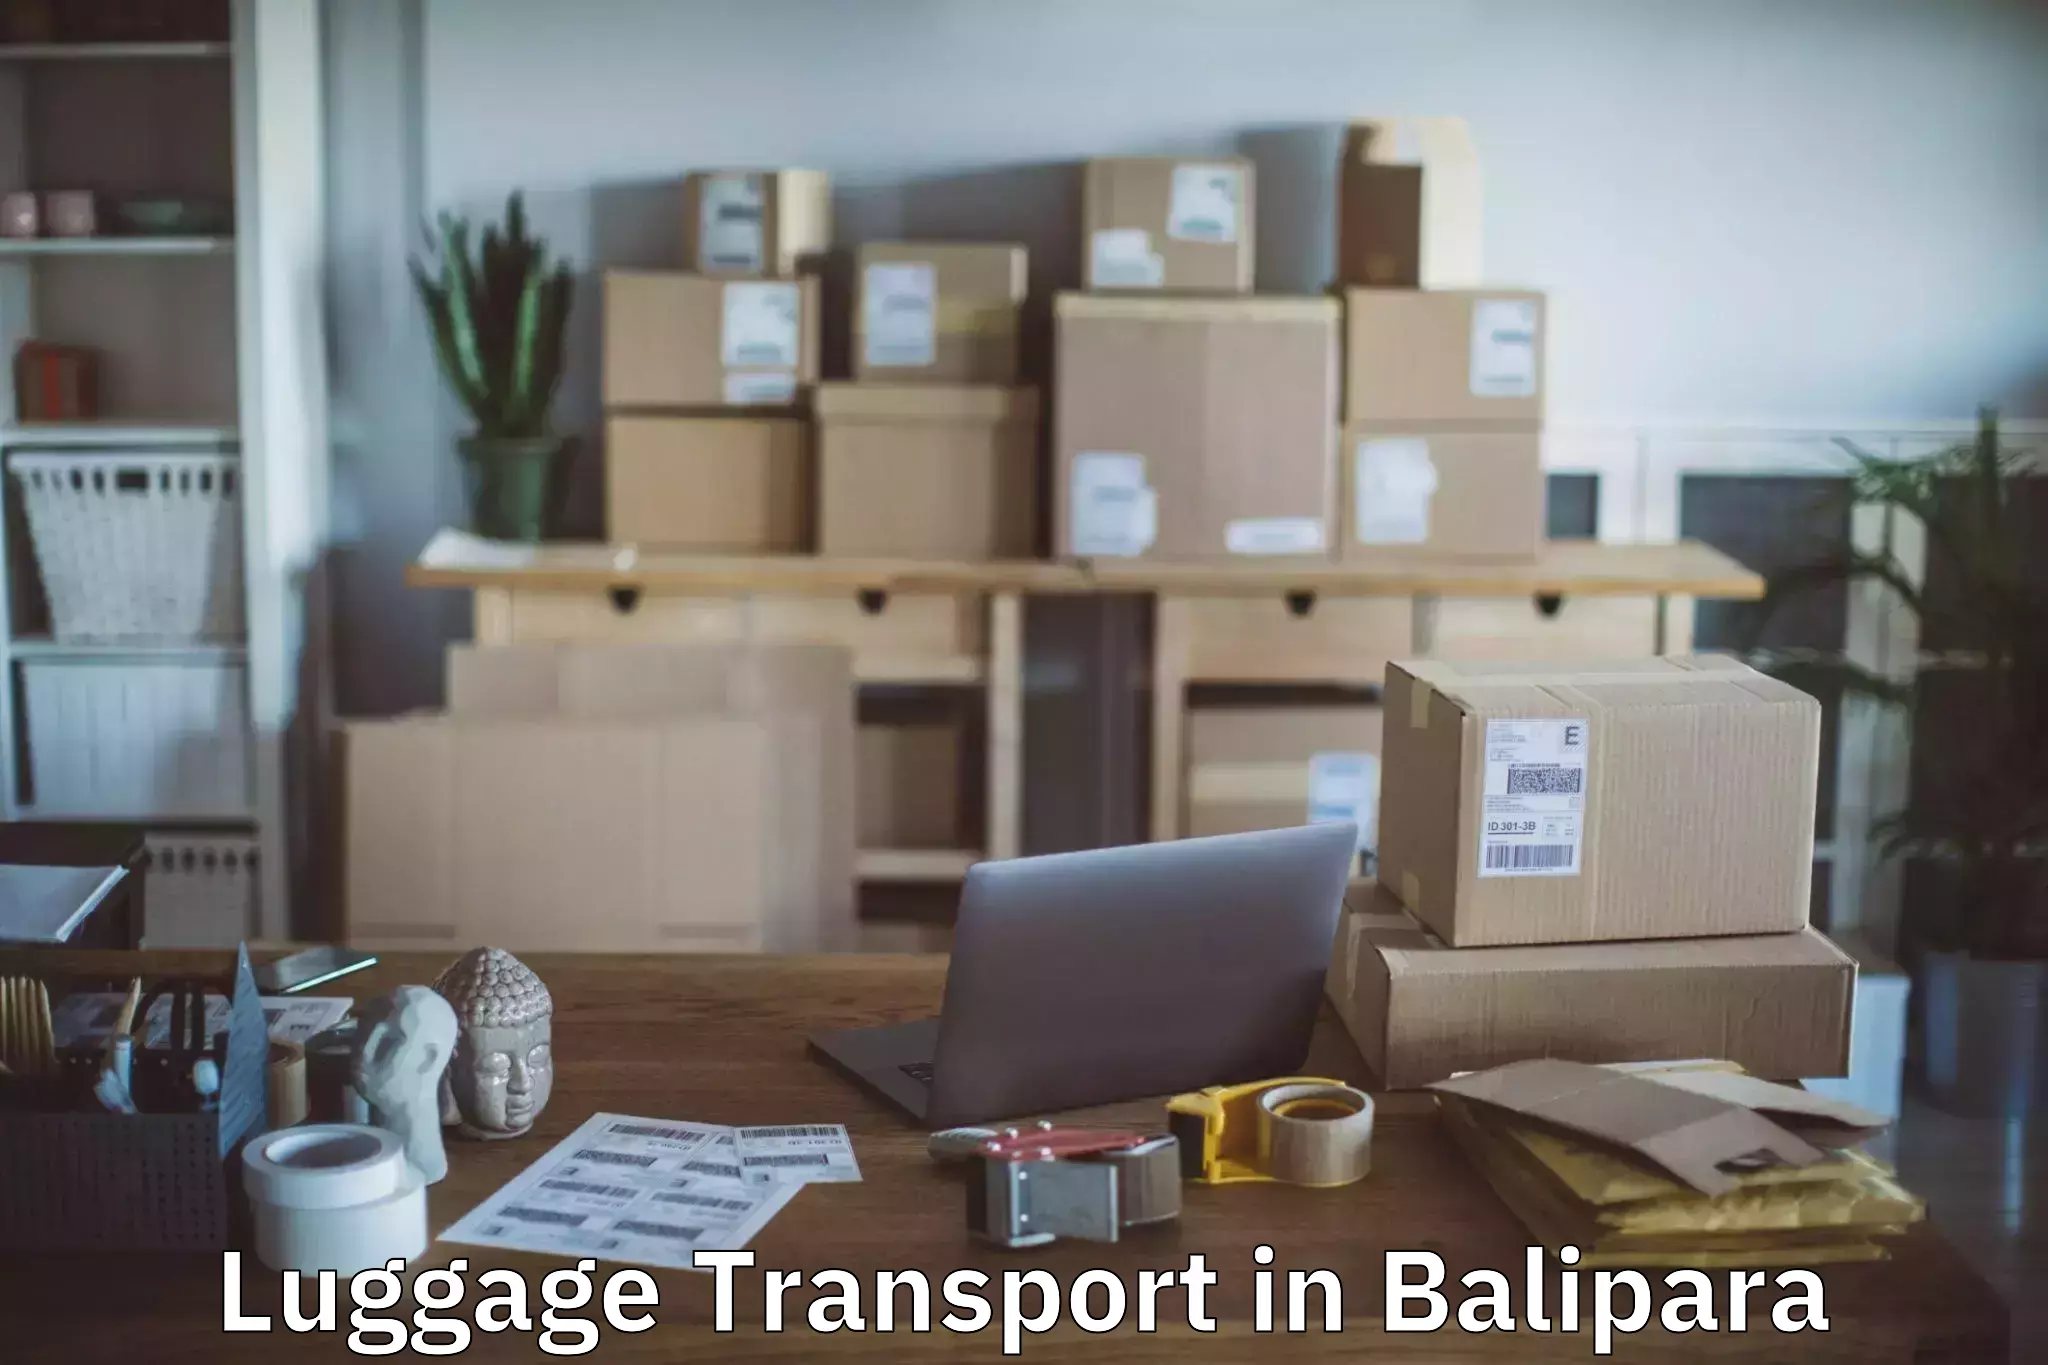 Business luggage transport in Balipara